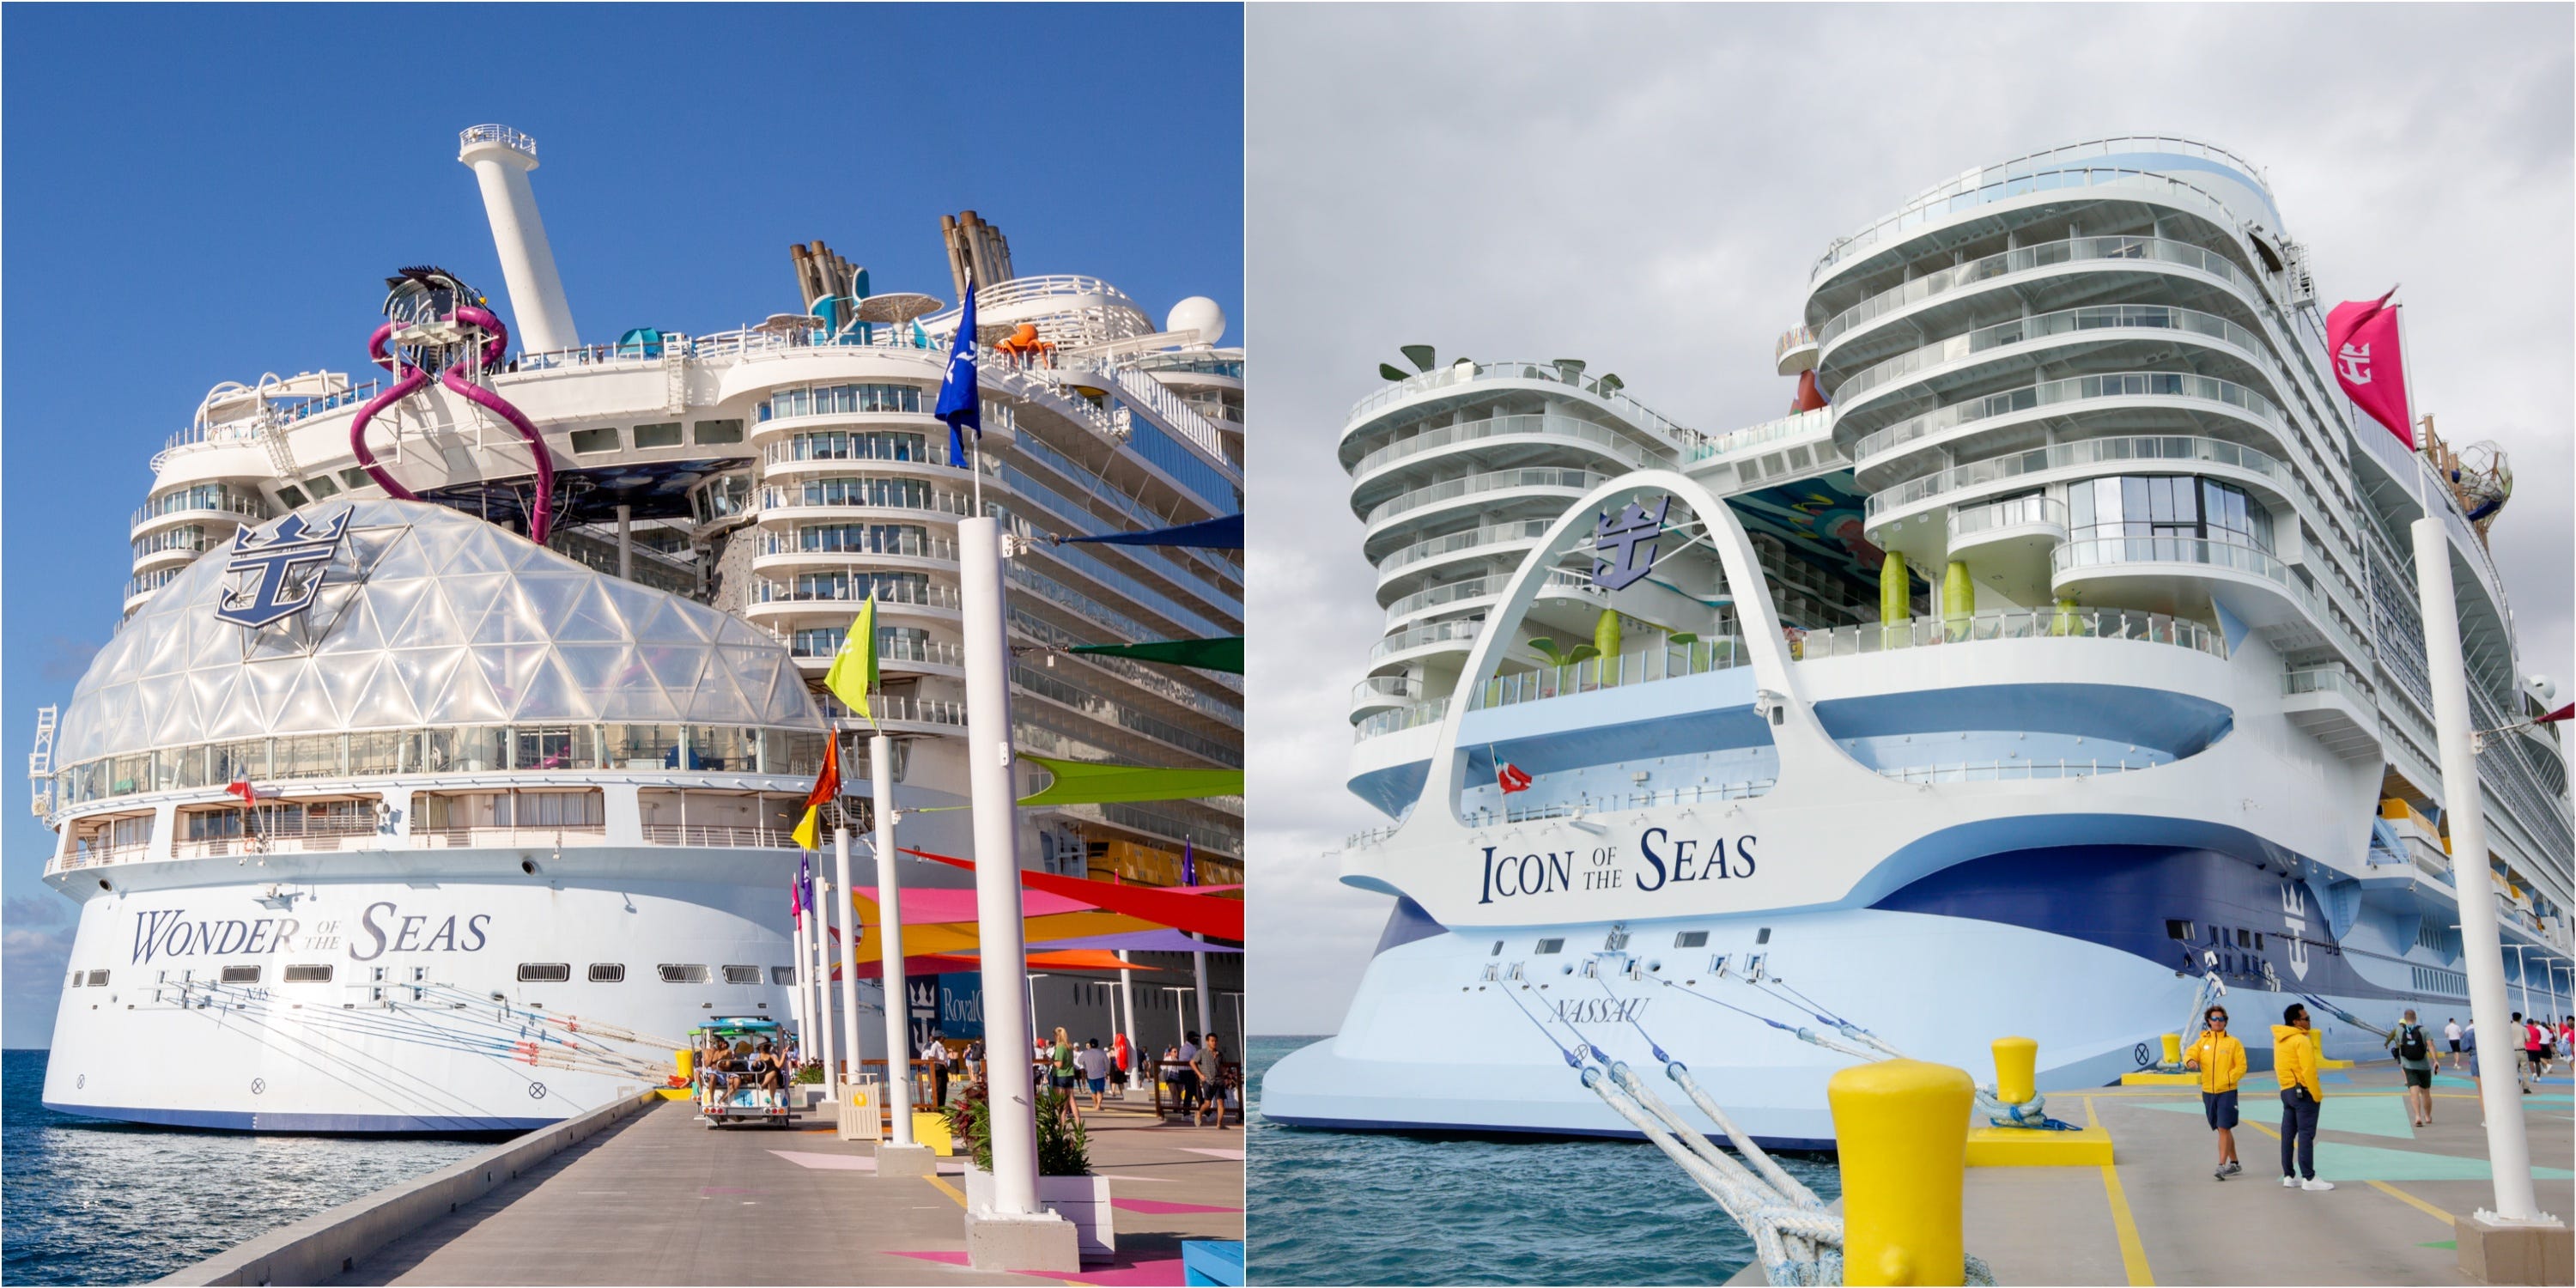 <p>In 2024, Wonder of the Seas is scheduled for year-round sailings from Port Canaveral to the Caribbean and <a href="https://www.businessinsider.com/royal-caribbean-perfect-day-cococay-new-adult-only-area-review-2024-2">Royal Caribbean's private island, Perfect Day at CocoCay</a>, starting at $700 per person.</p><p>Icon of the Seas is spending its first year in service operating nearly identical itineraries but from Miami instead. The <a href="https://www.businessinsider.com/royal-caribbean-icon-of-the-seas-trip-price-expensive-2023-11">cheapest 2024 option</a> is $1,786 per person.</p><p>That's a difference of more than $125 per person per day.</p><p>"Bookings and pricing for Icon of the Seas can only be described as 'iconic,'" Naftali Holtz, the CFO of Royal Caribbean Group, told analysts in February.</p>